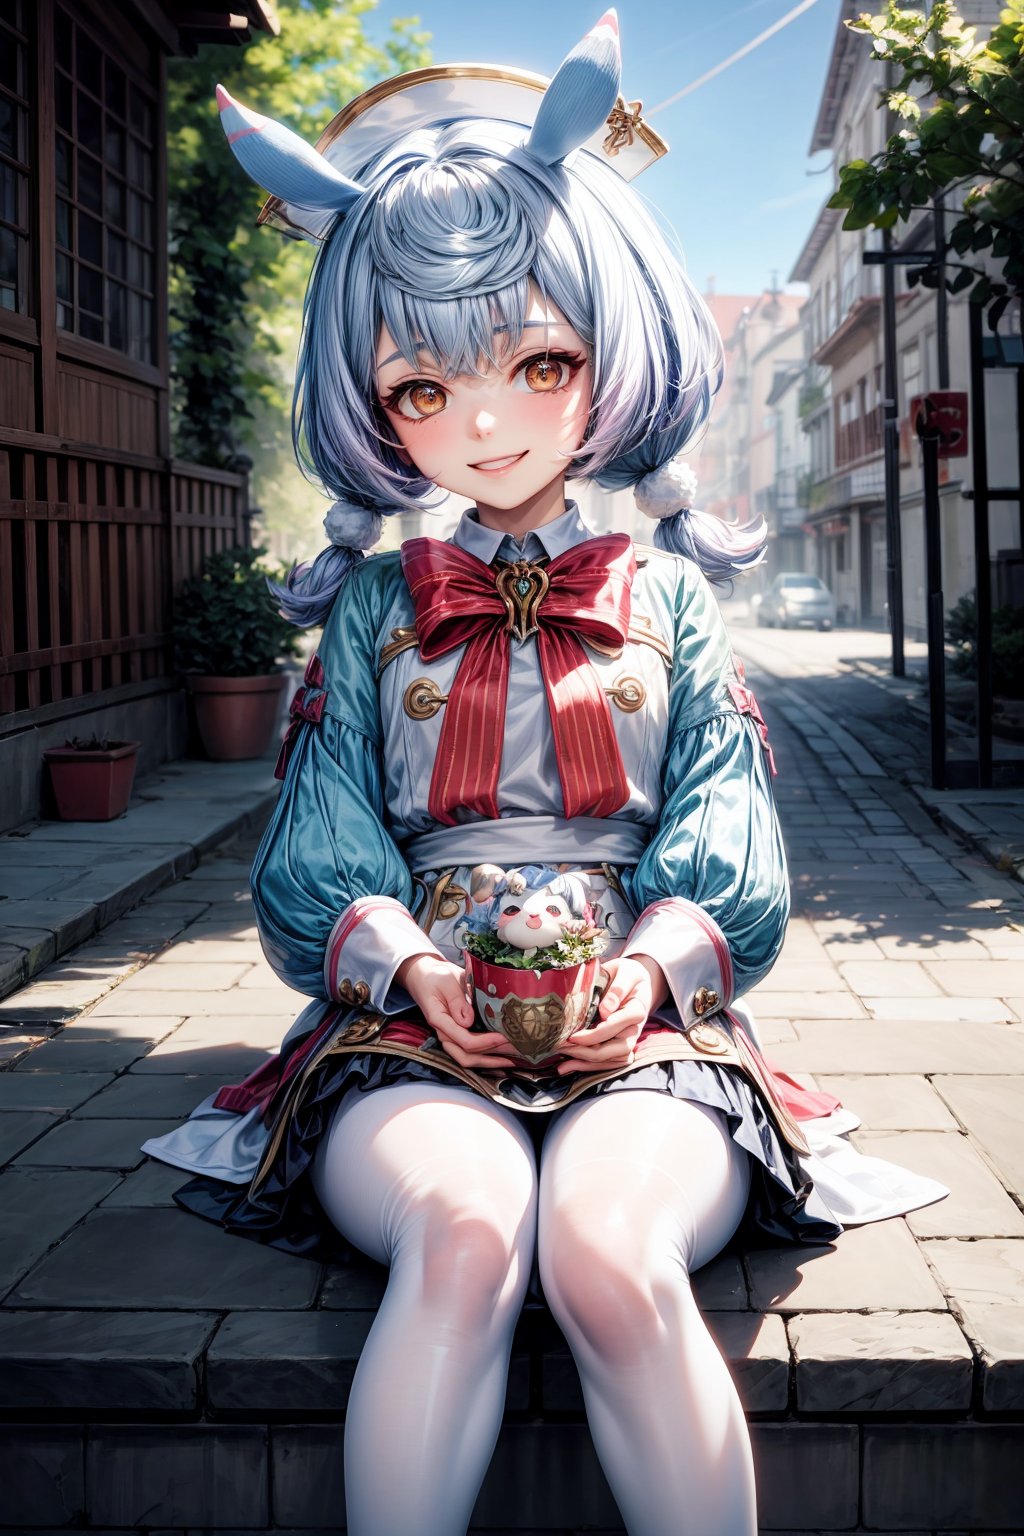 A whimsical and playful scene! Sigewinne, the beloved character from Genshin Impact, strikes a pose outdoors with a mischievous grin. She wears a white apron over her red bow-adorned dress, which features long sleeves, twin tails, and a pom-pom hem. Her blue hair is tied up with a fluffy pom-pom ornament, and she sports animal ears on her head. A matching pair of boots and white pantyhose complete her outfit. The vision in front of her seems to be the focus of her attention, as she gazes smugly into the distance. In the background, a warm sunlight casts a gentle glow, illuminating the scene with a sense of joy and adventure.